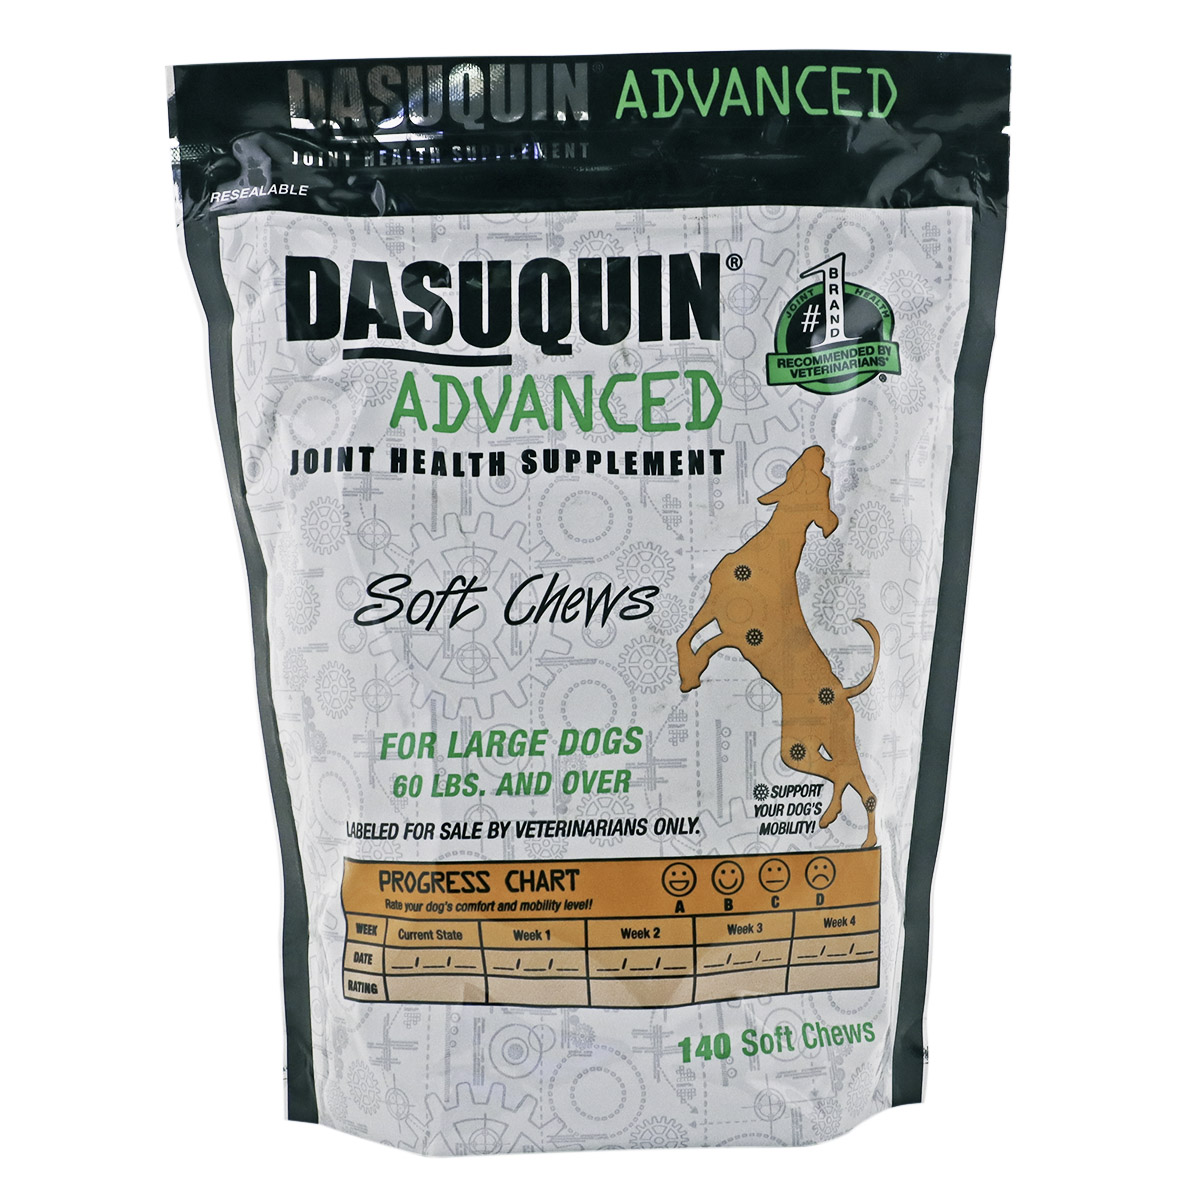 northeast-veterinary-services-dasuquin-advanced-soft-chews-for-large